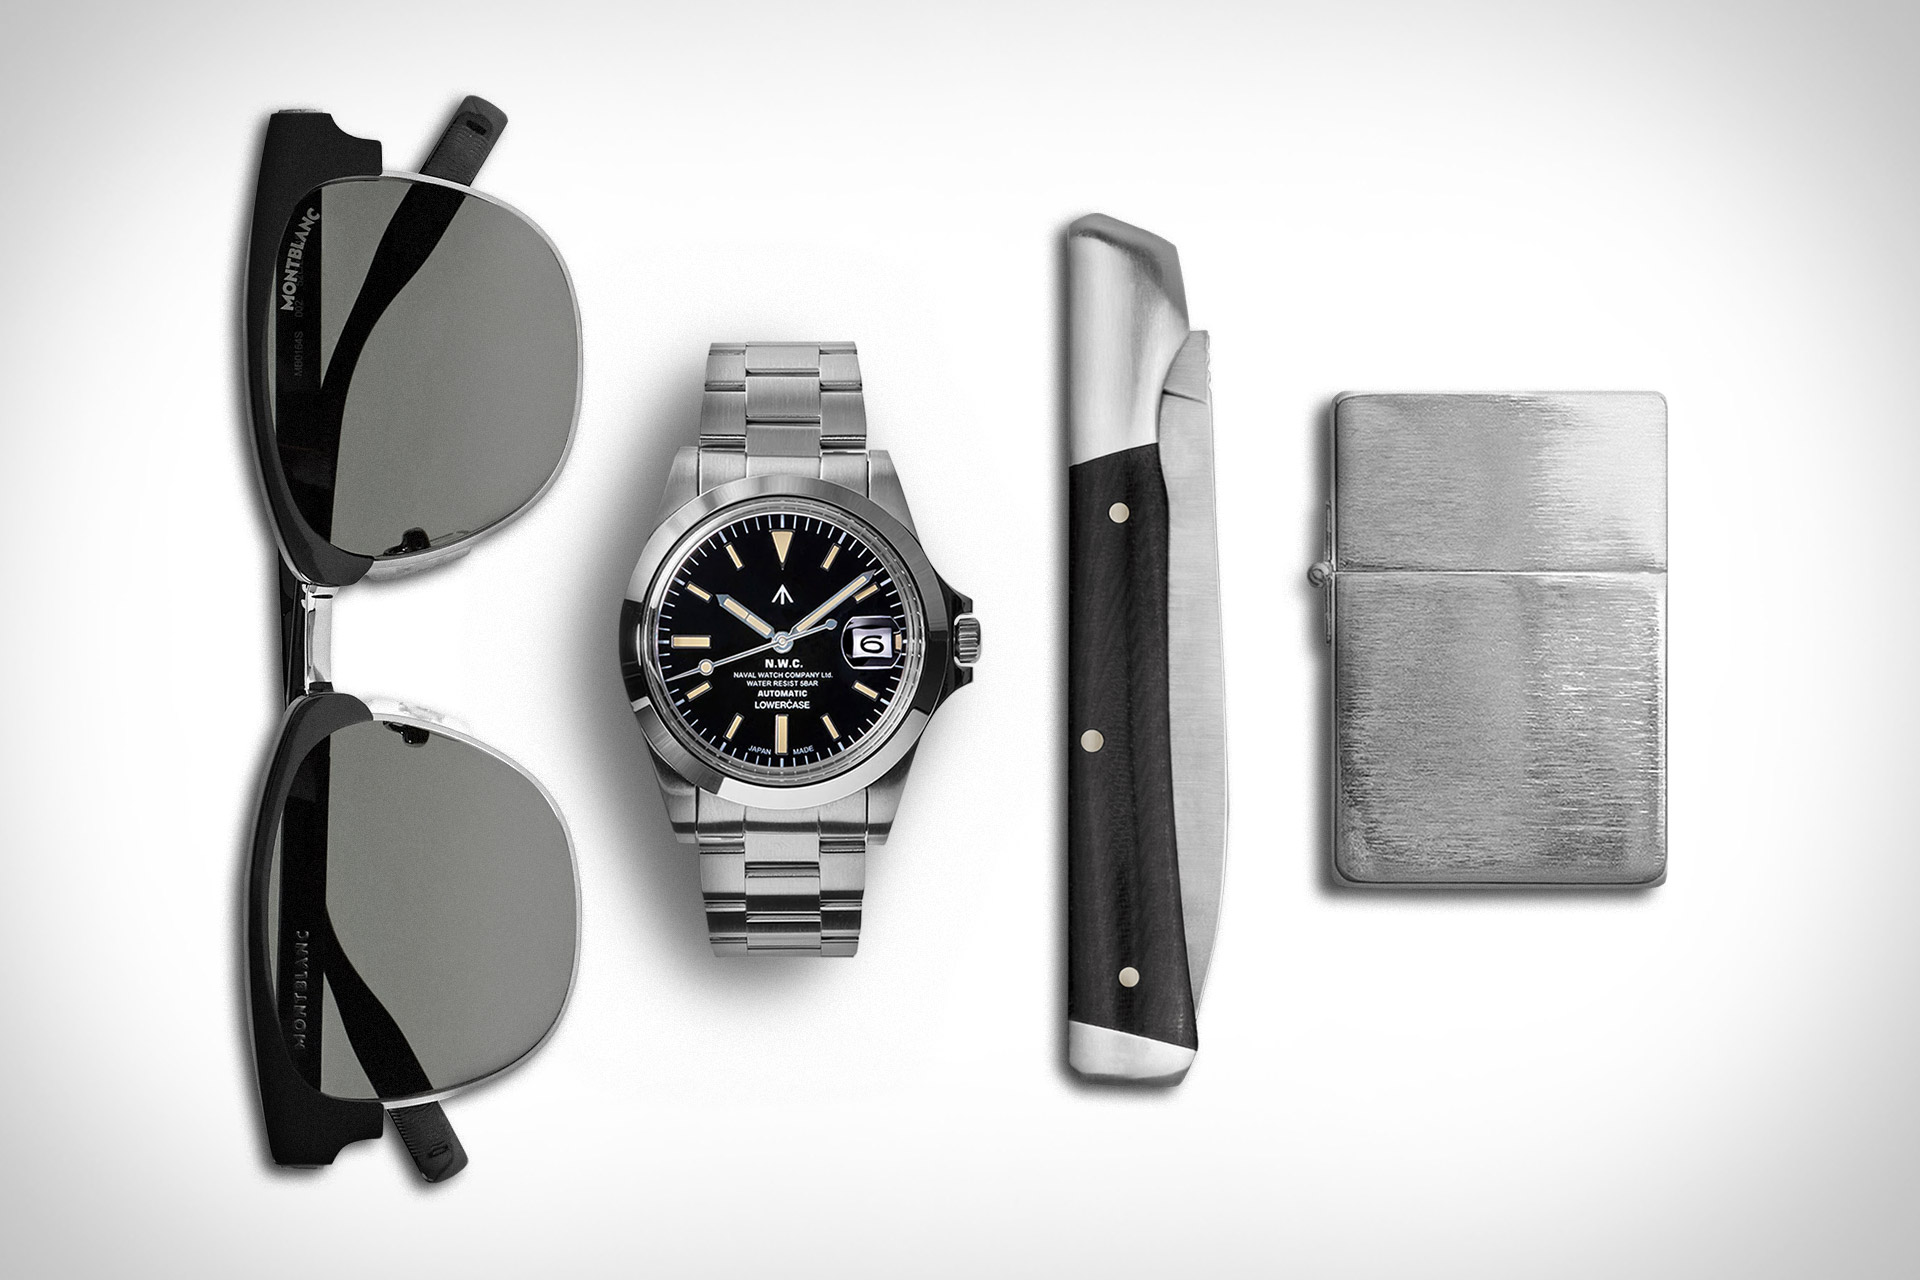 Everyday Carry: Silver Lining | Uncrate, #Everyday #Carry #Silver #Lining #Uncrate